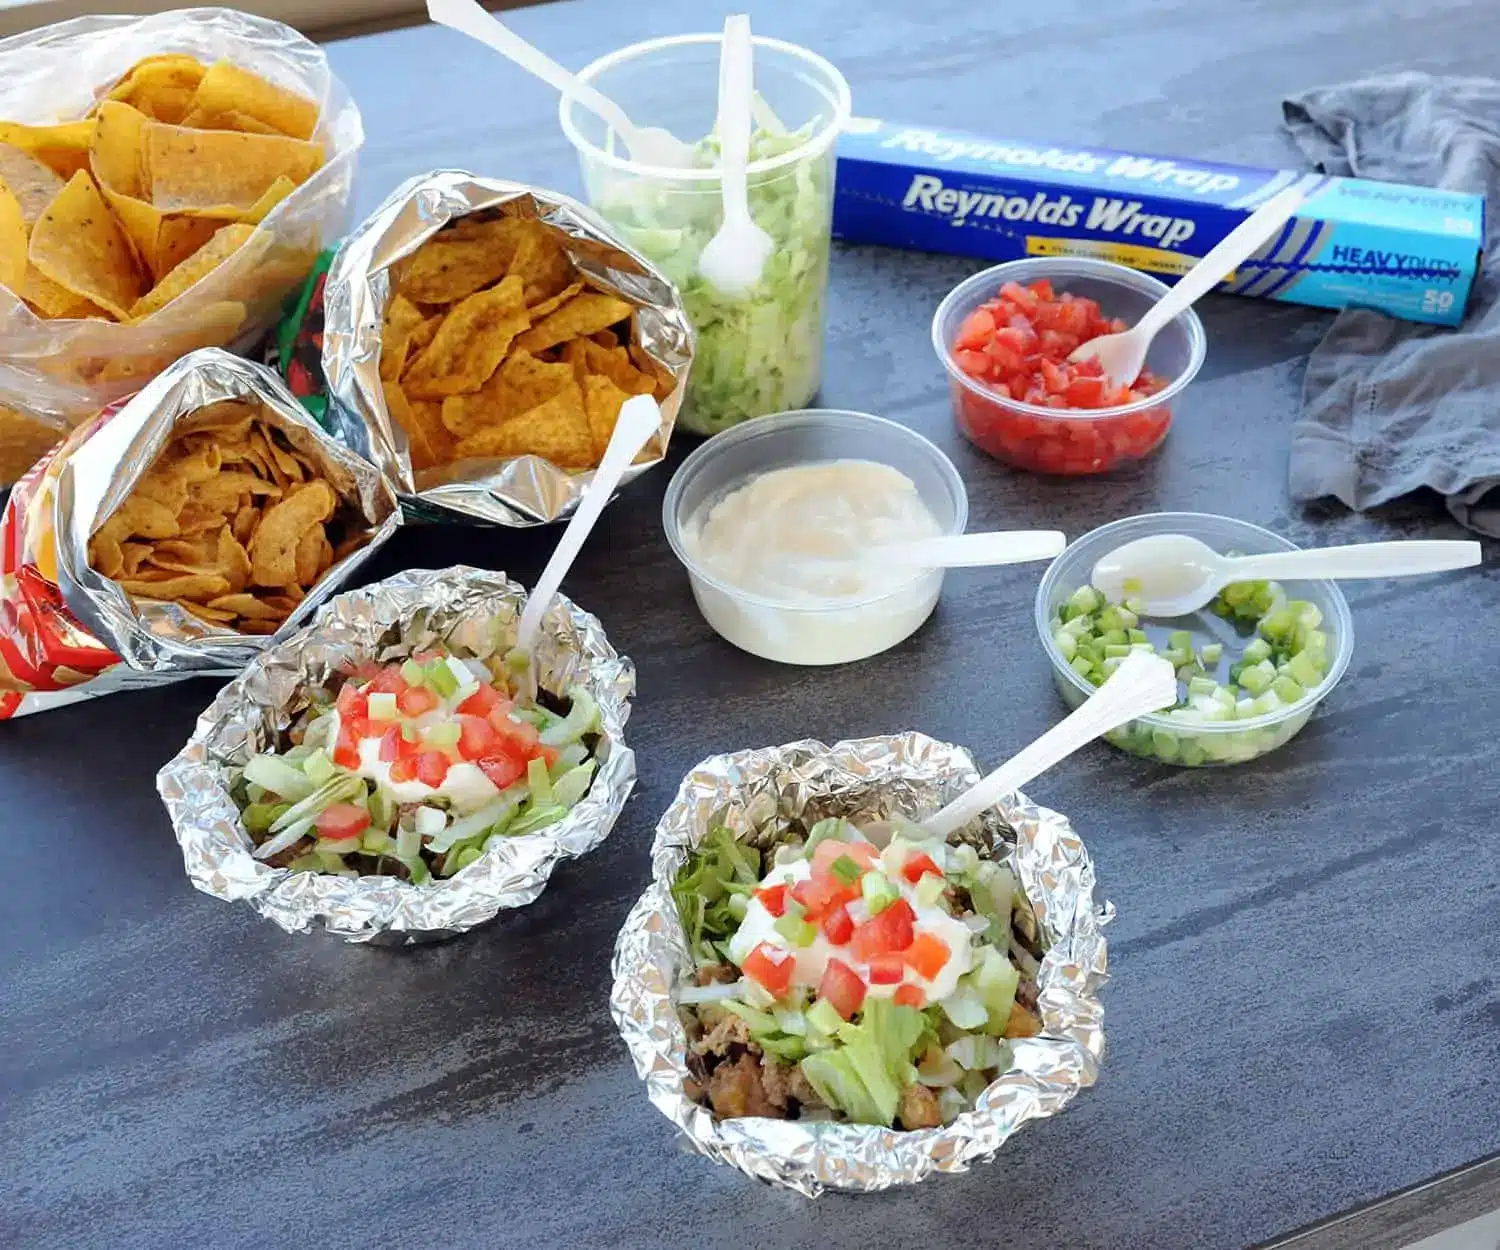 Foil packets with taco ingredients on a wood table.